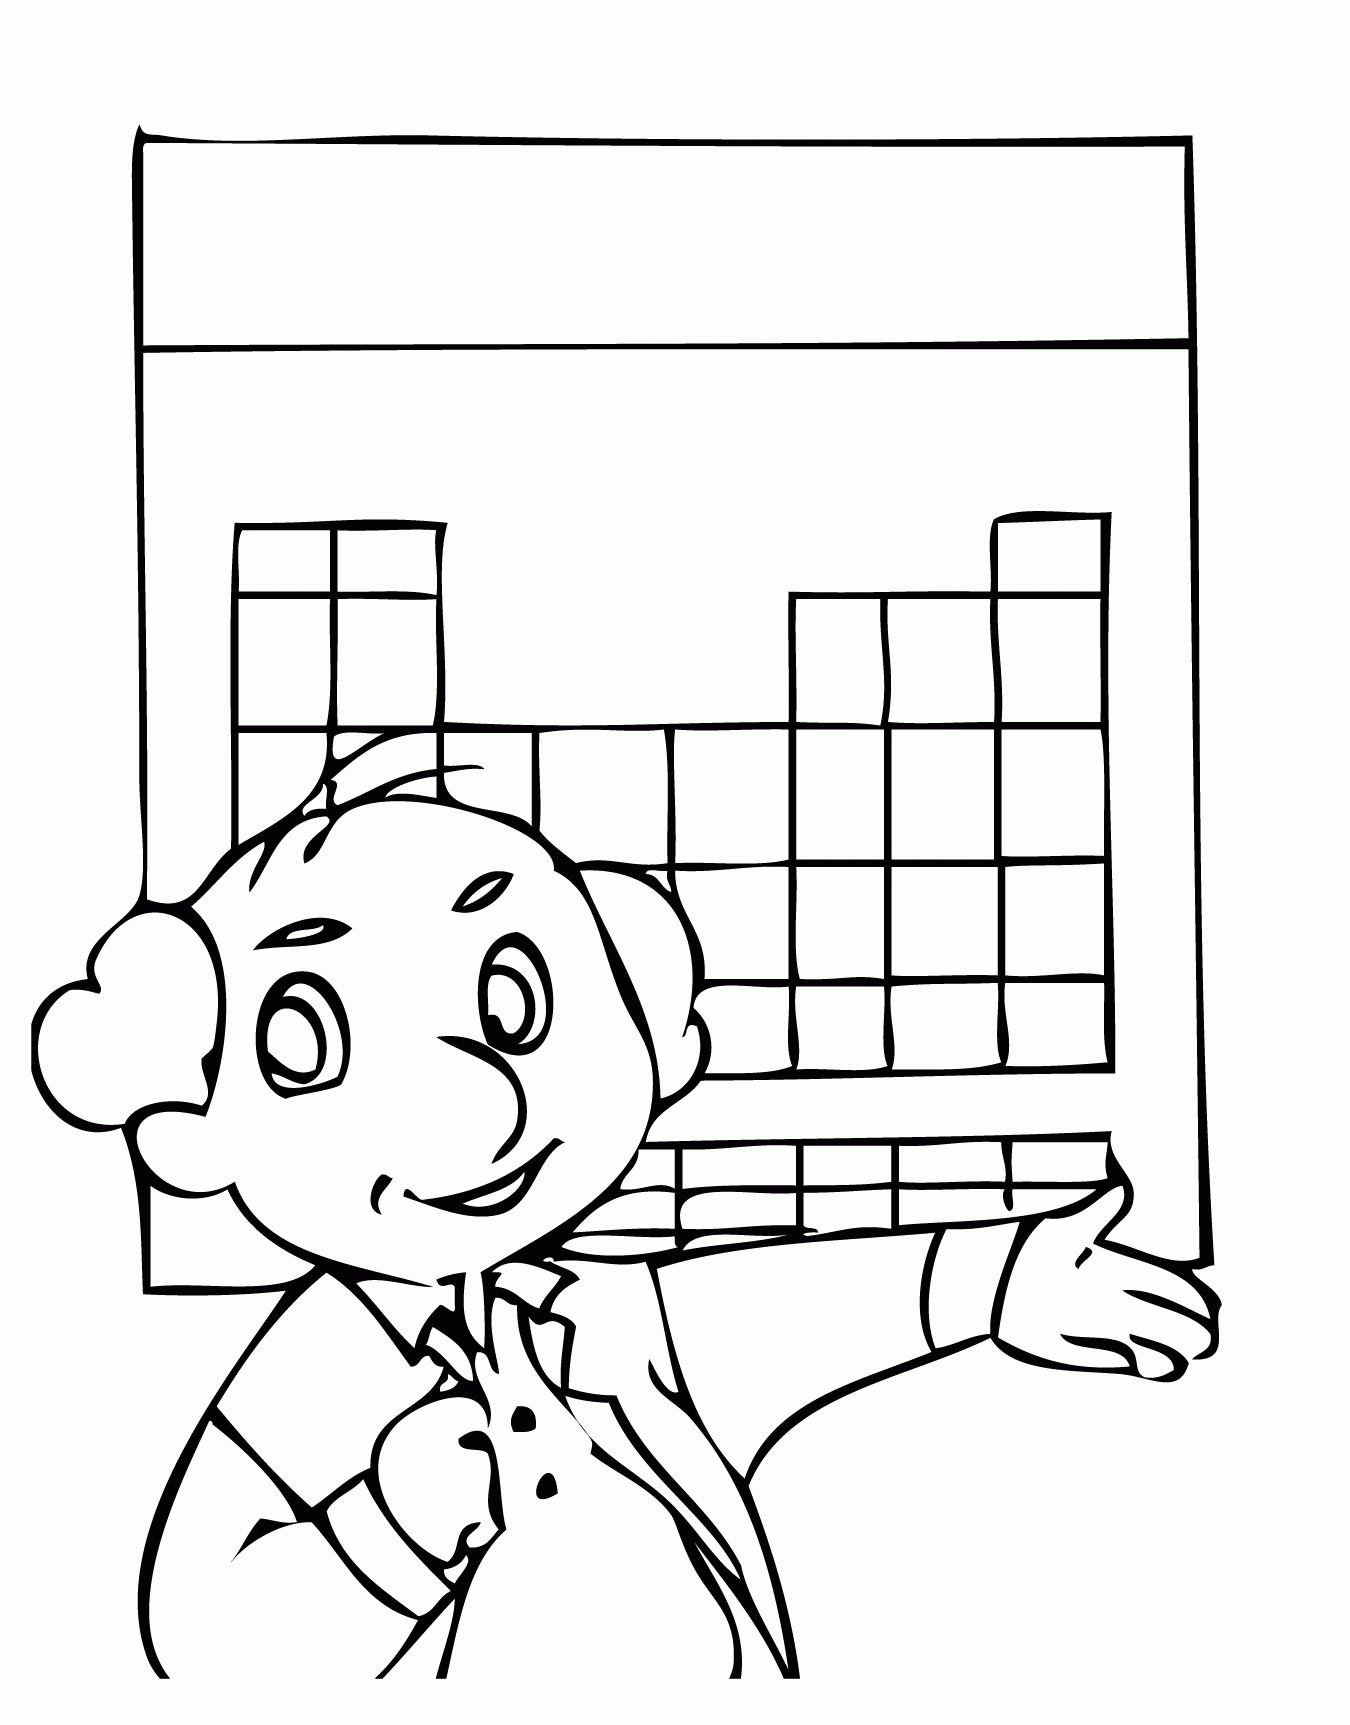 Free Periodic Table Coloring Book For Kids
 Periodic Table Coloring Sheet AZ Coloring Pages